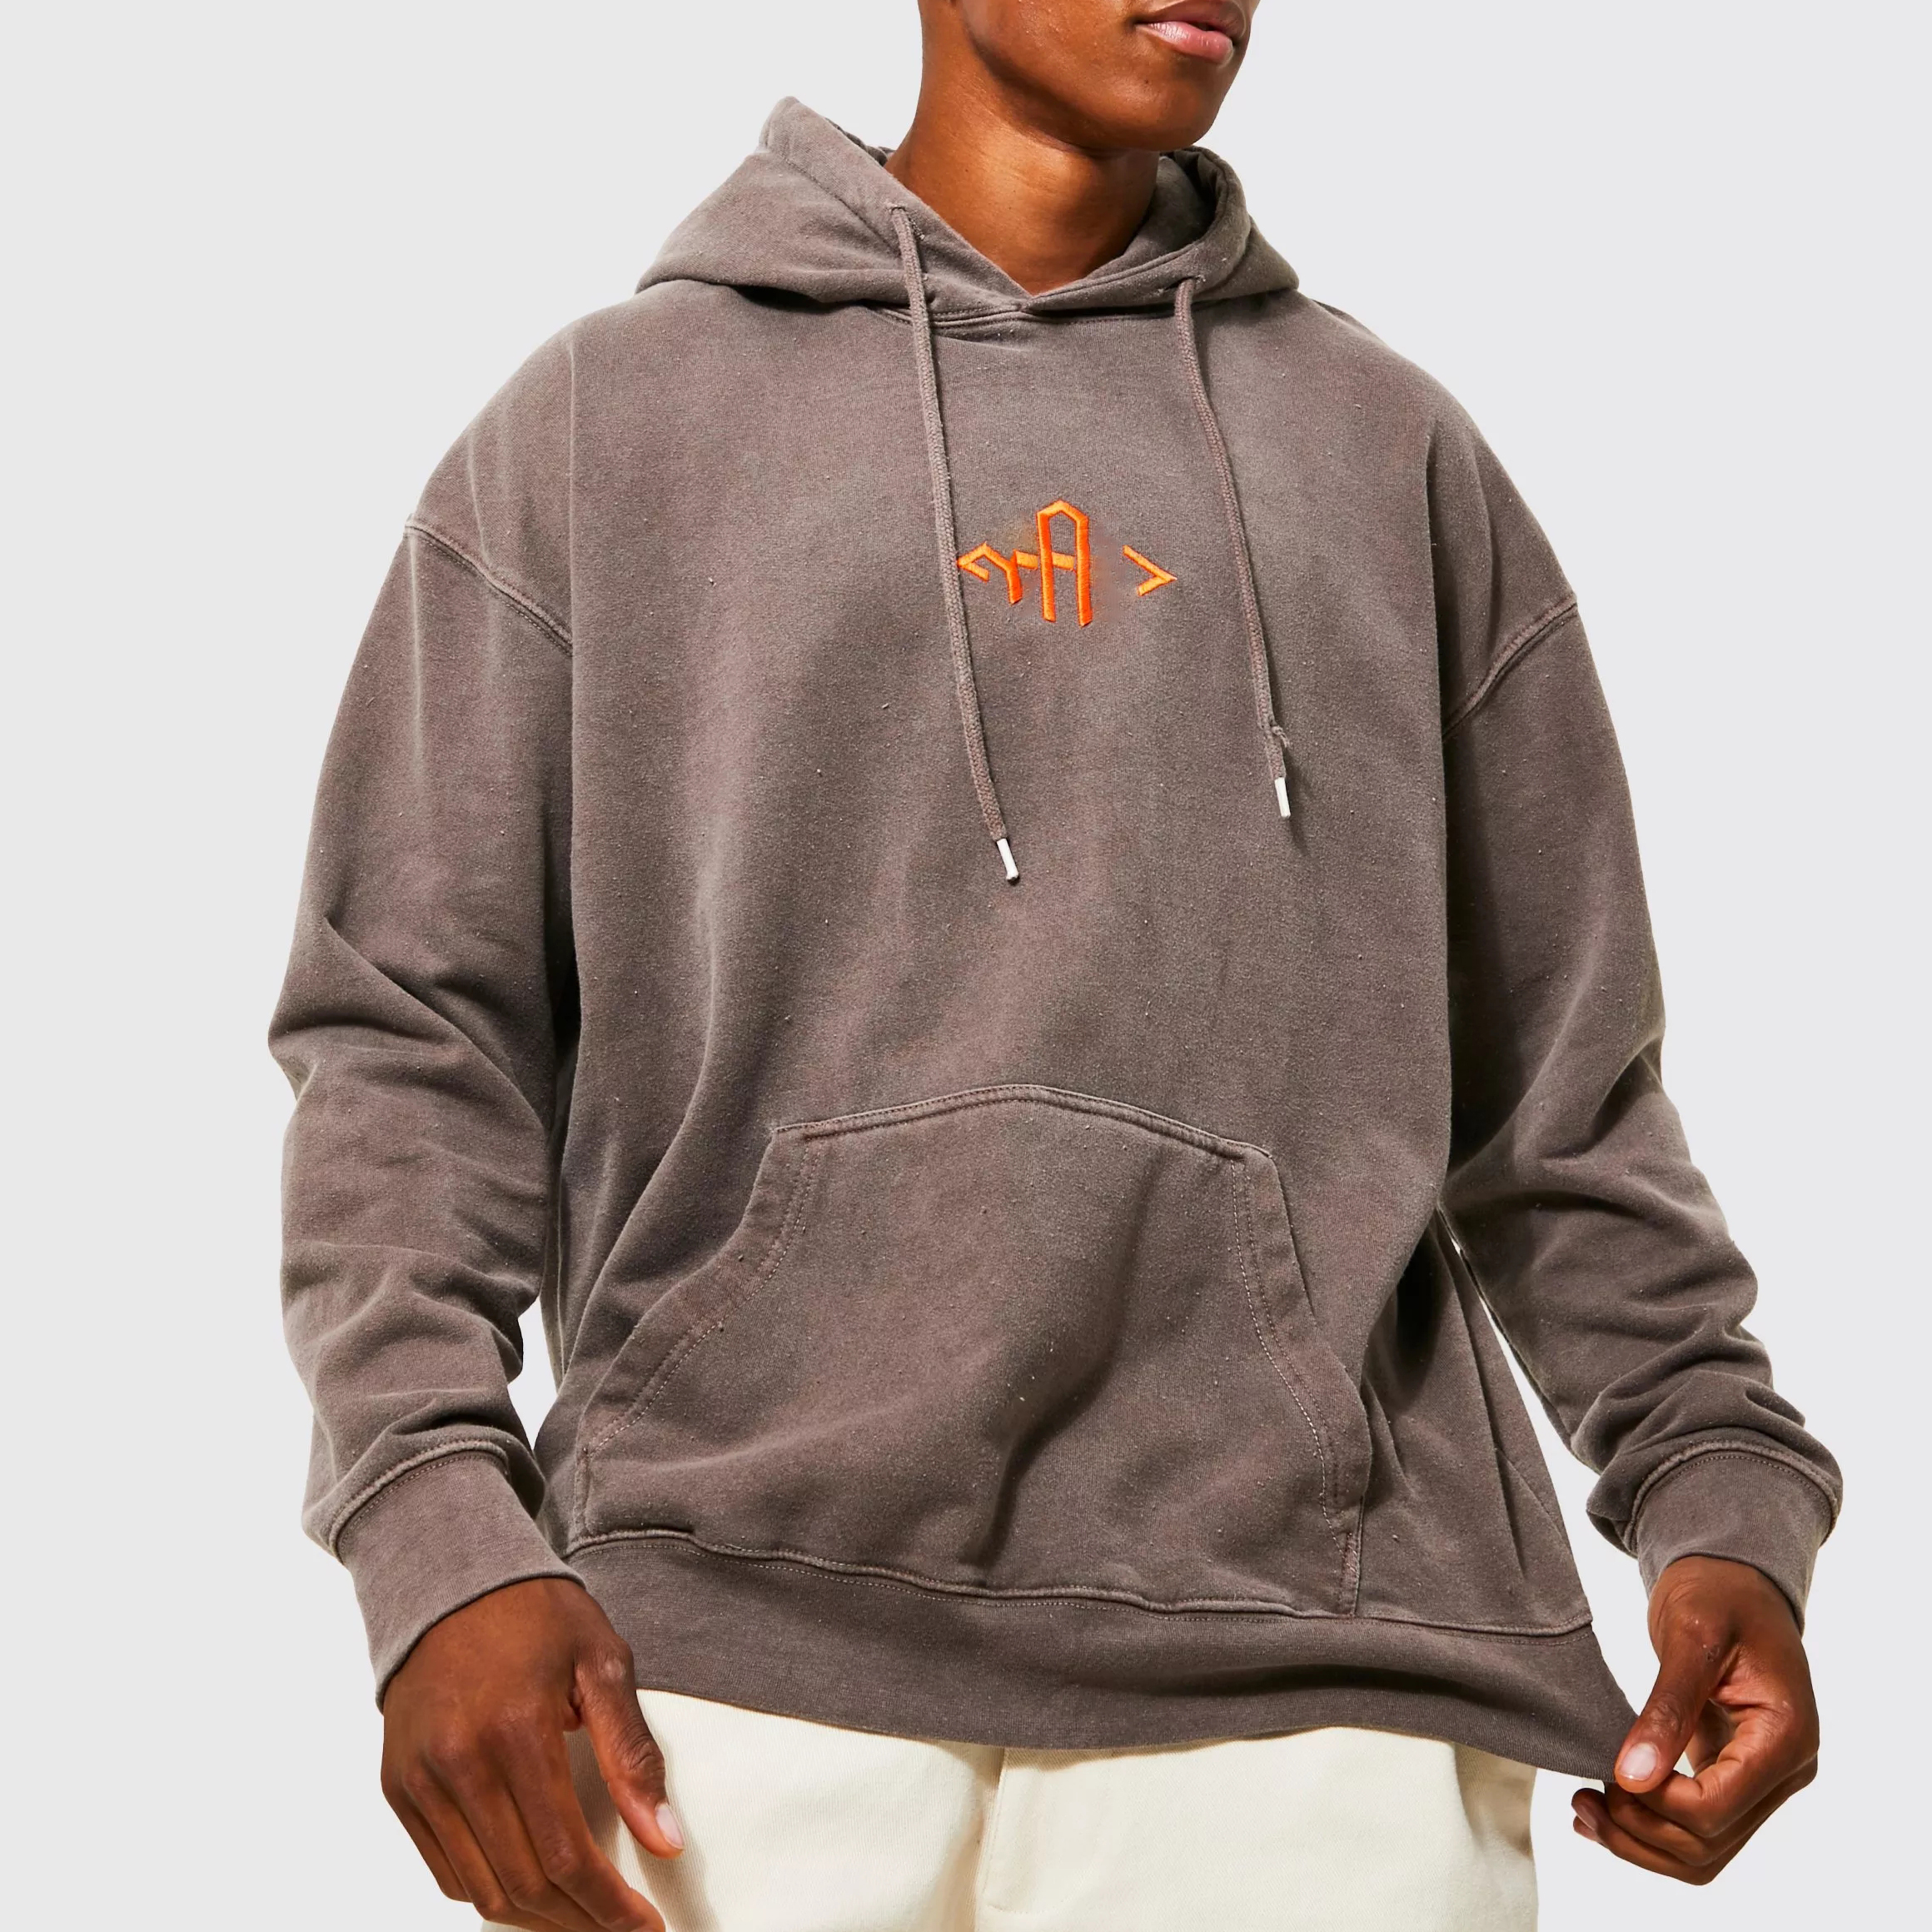 wholesale cotton high quality cotton distressed acid washed oversized streetwear embroidery hoodies men